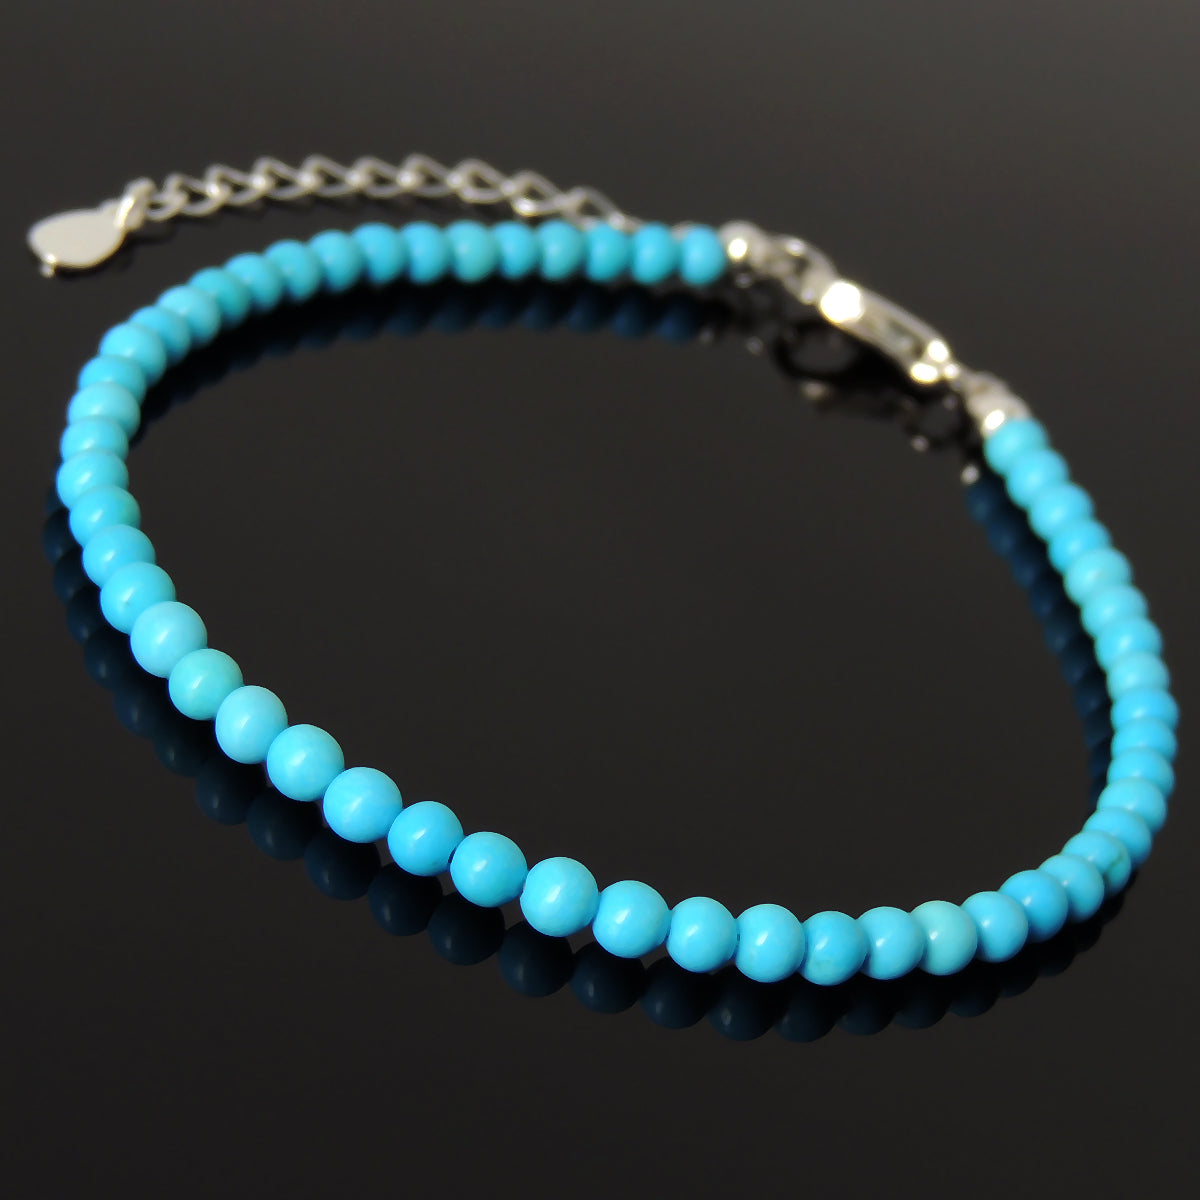 3mm Enhanced Turquoise Healing Gemstone Bracelet with S925 Sterling Silver Chain & Clasp - Handmade by Gem & Silver BR1231